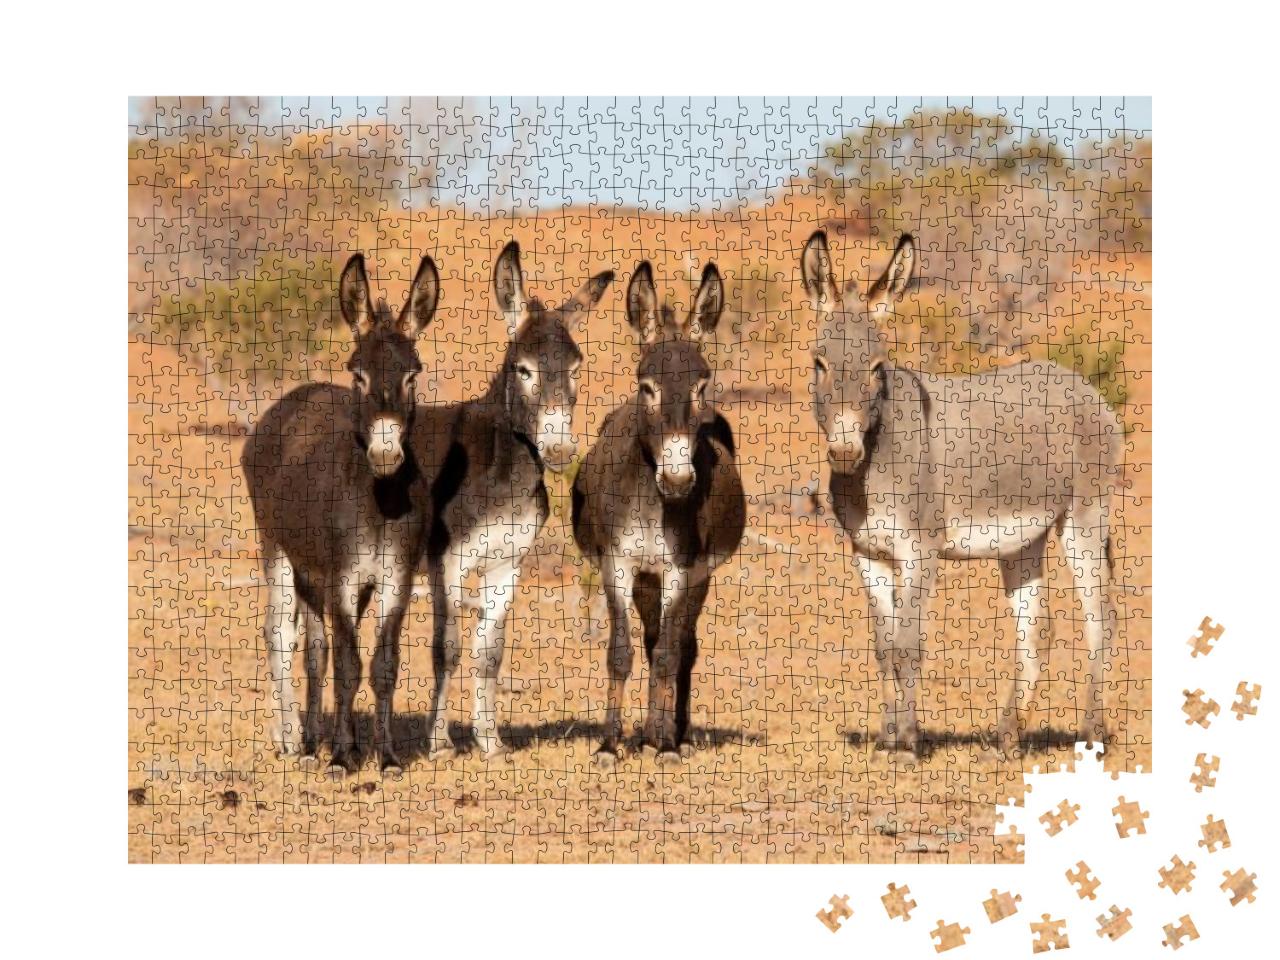 Wild Donkeys Living in Outback Australia... Jigsaw Puzzle with 1000 pieces